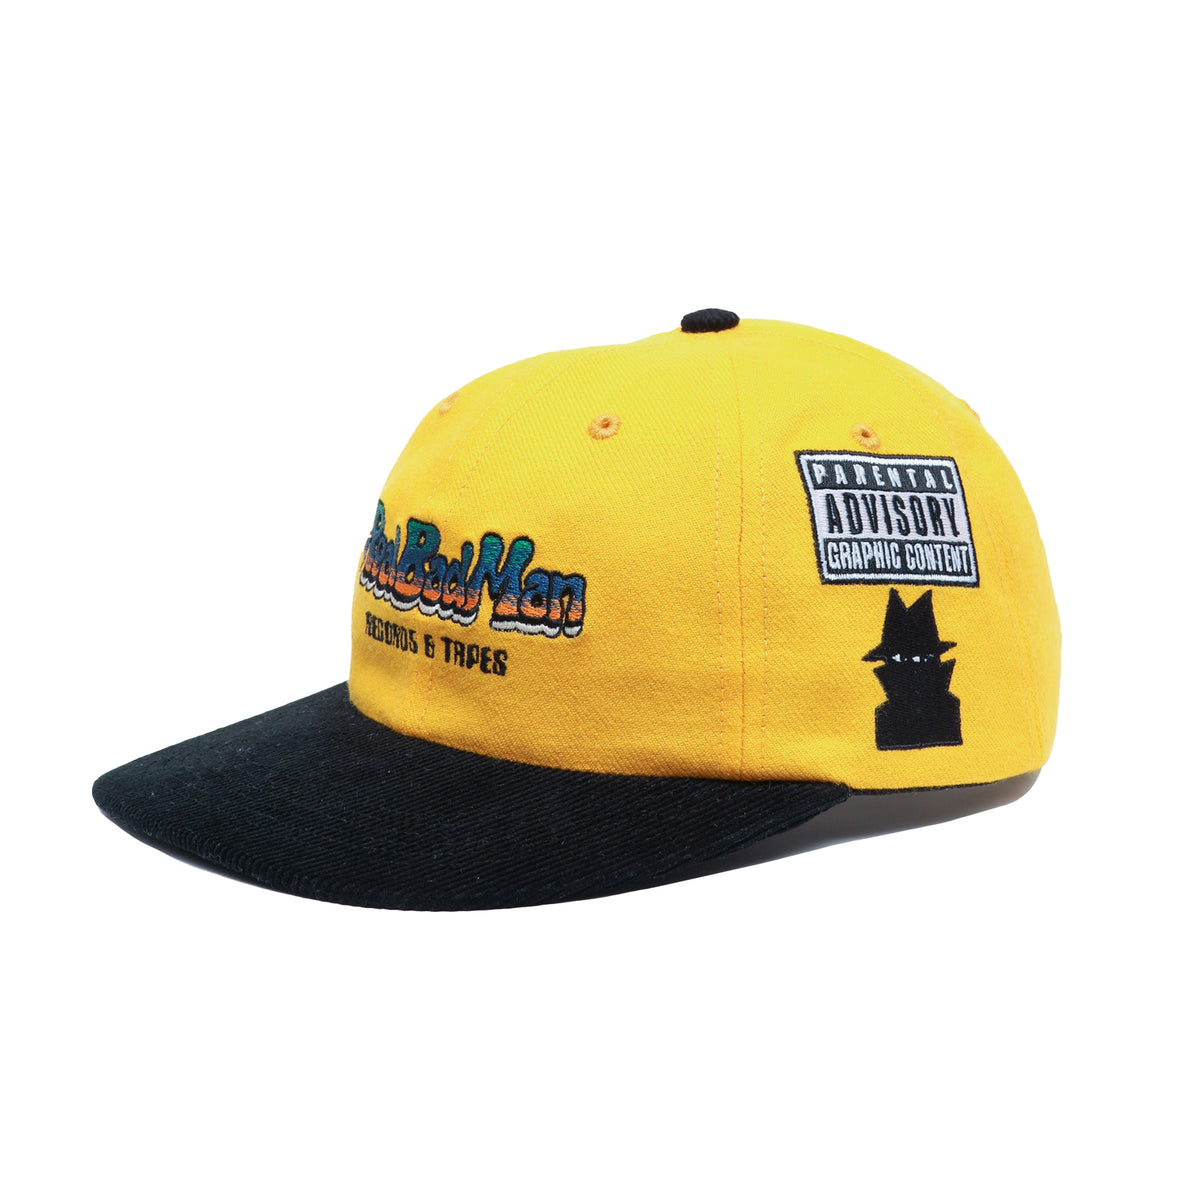 Records & Tapes Hat